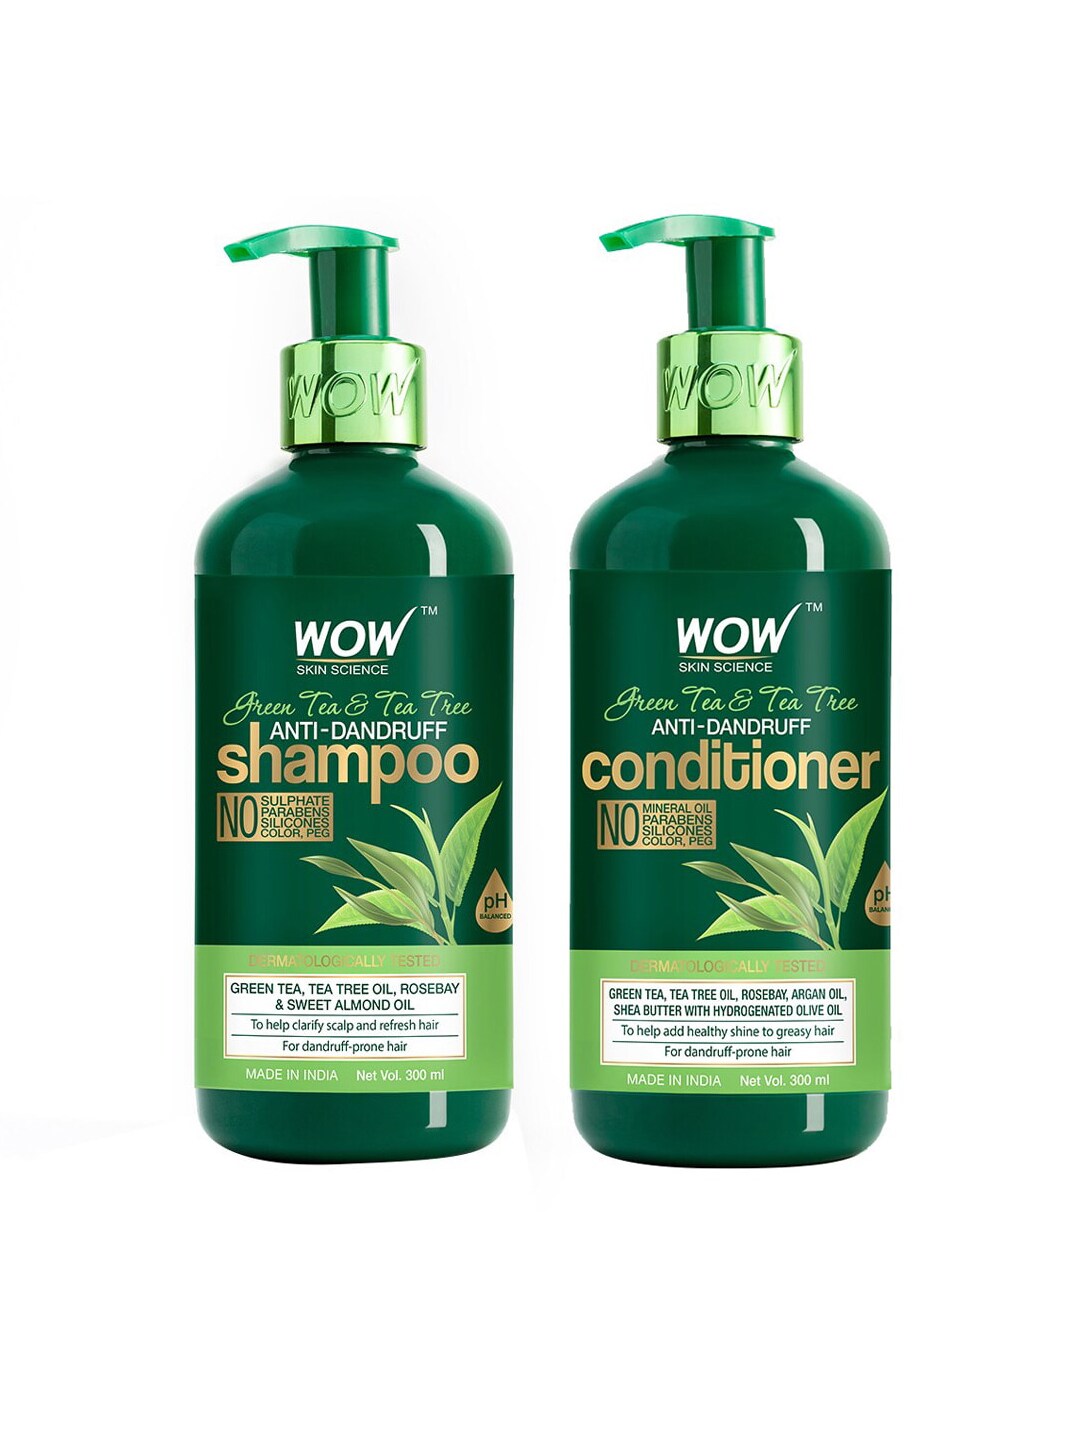 WOW SKIN SCIENCE Unisex Set of Green Tea Shampoo & Conditioner 600 ml Price in India